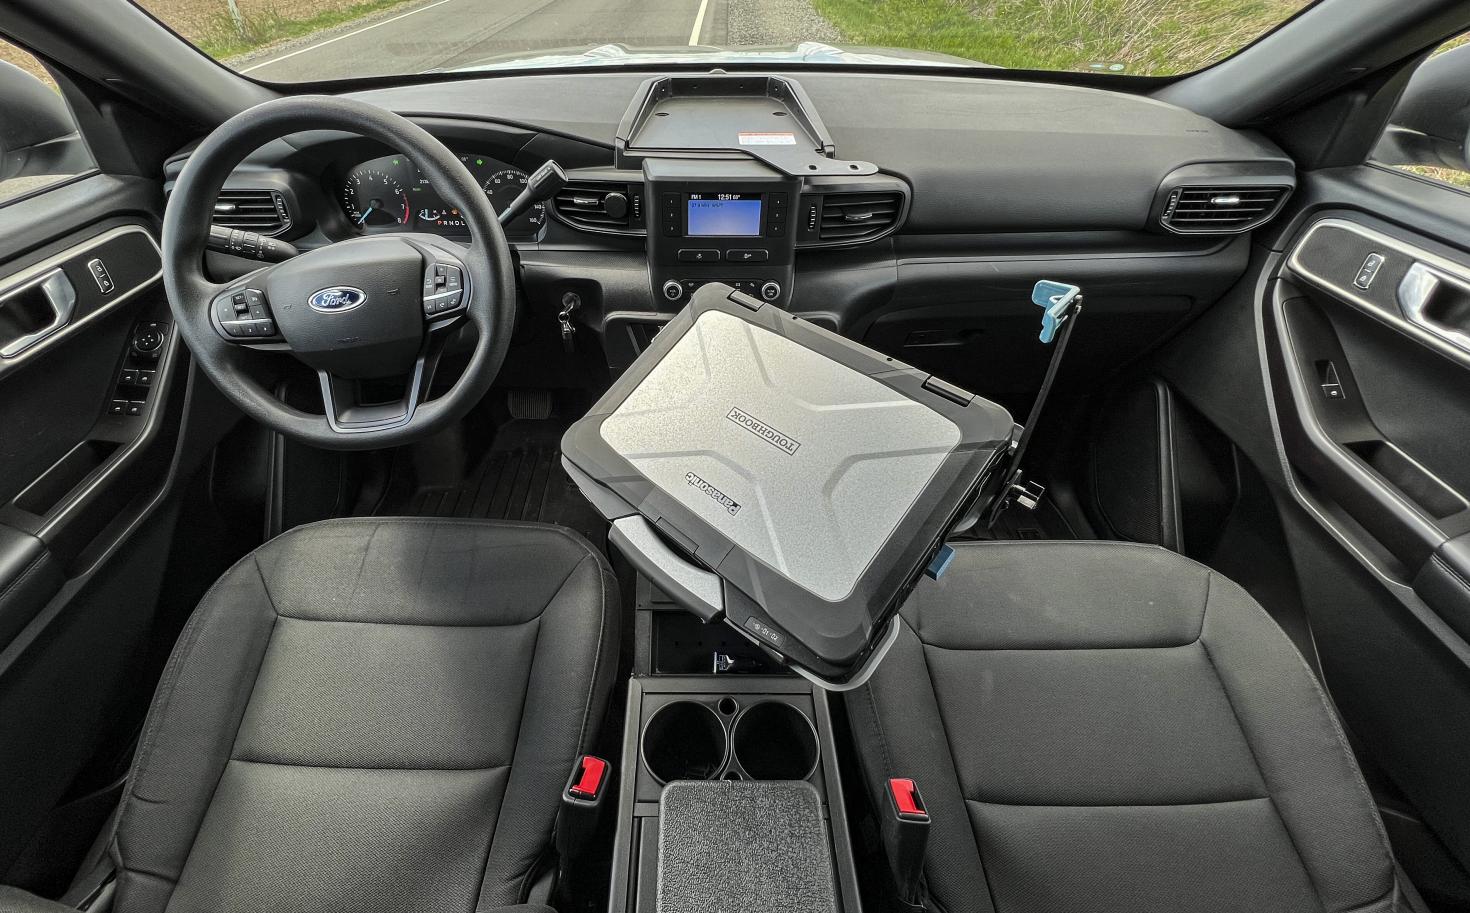 Panasonic Toughbook 40 Gamber-Johnson Docking Station installed in Ford Interceptor Utility with rugged computer